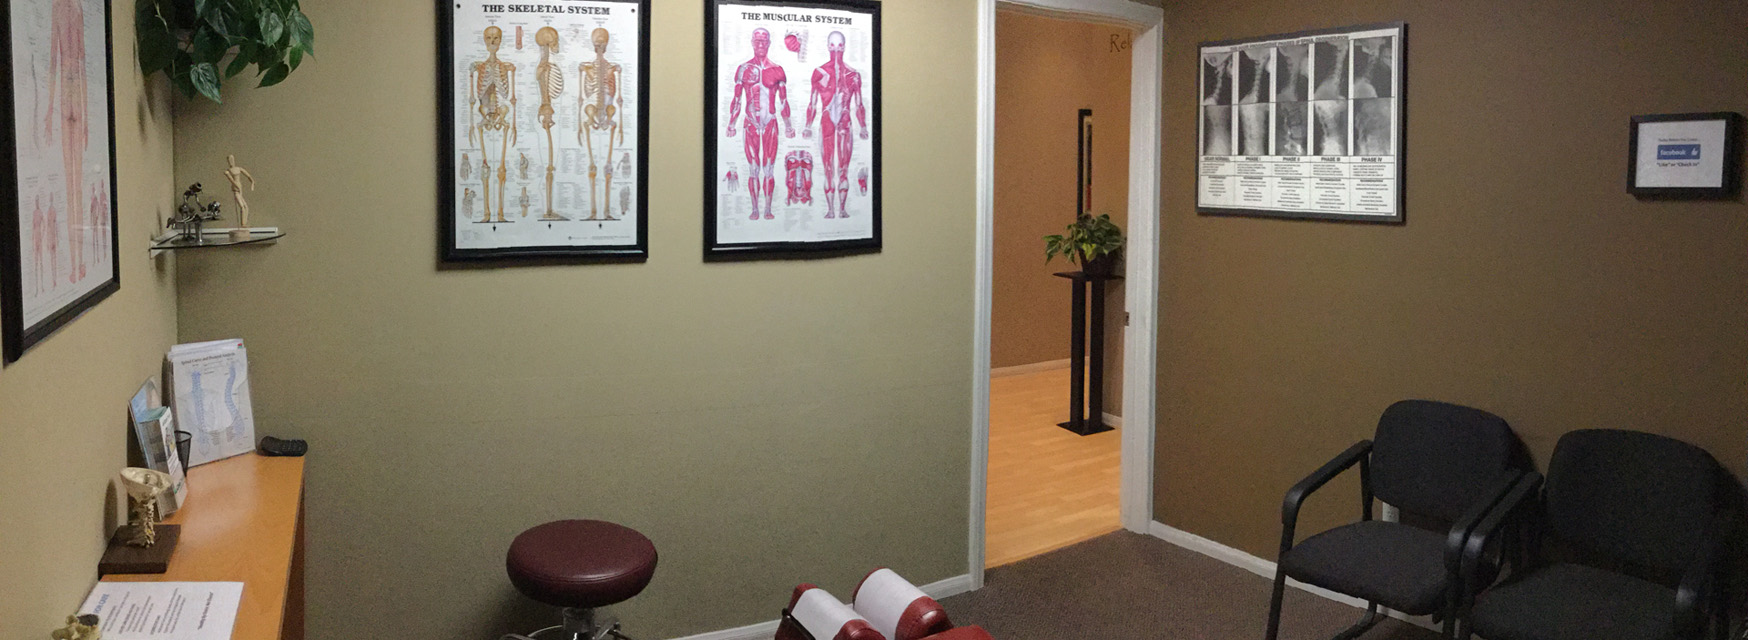 Image of San Diego Chiropractic and Massage exam room